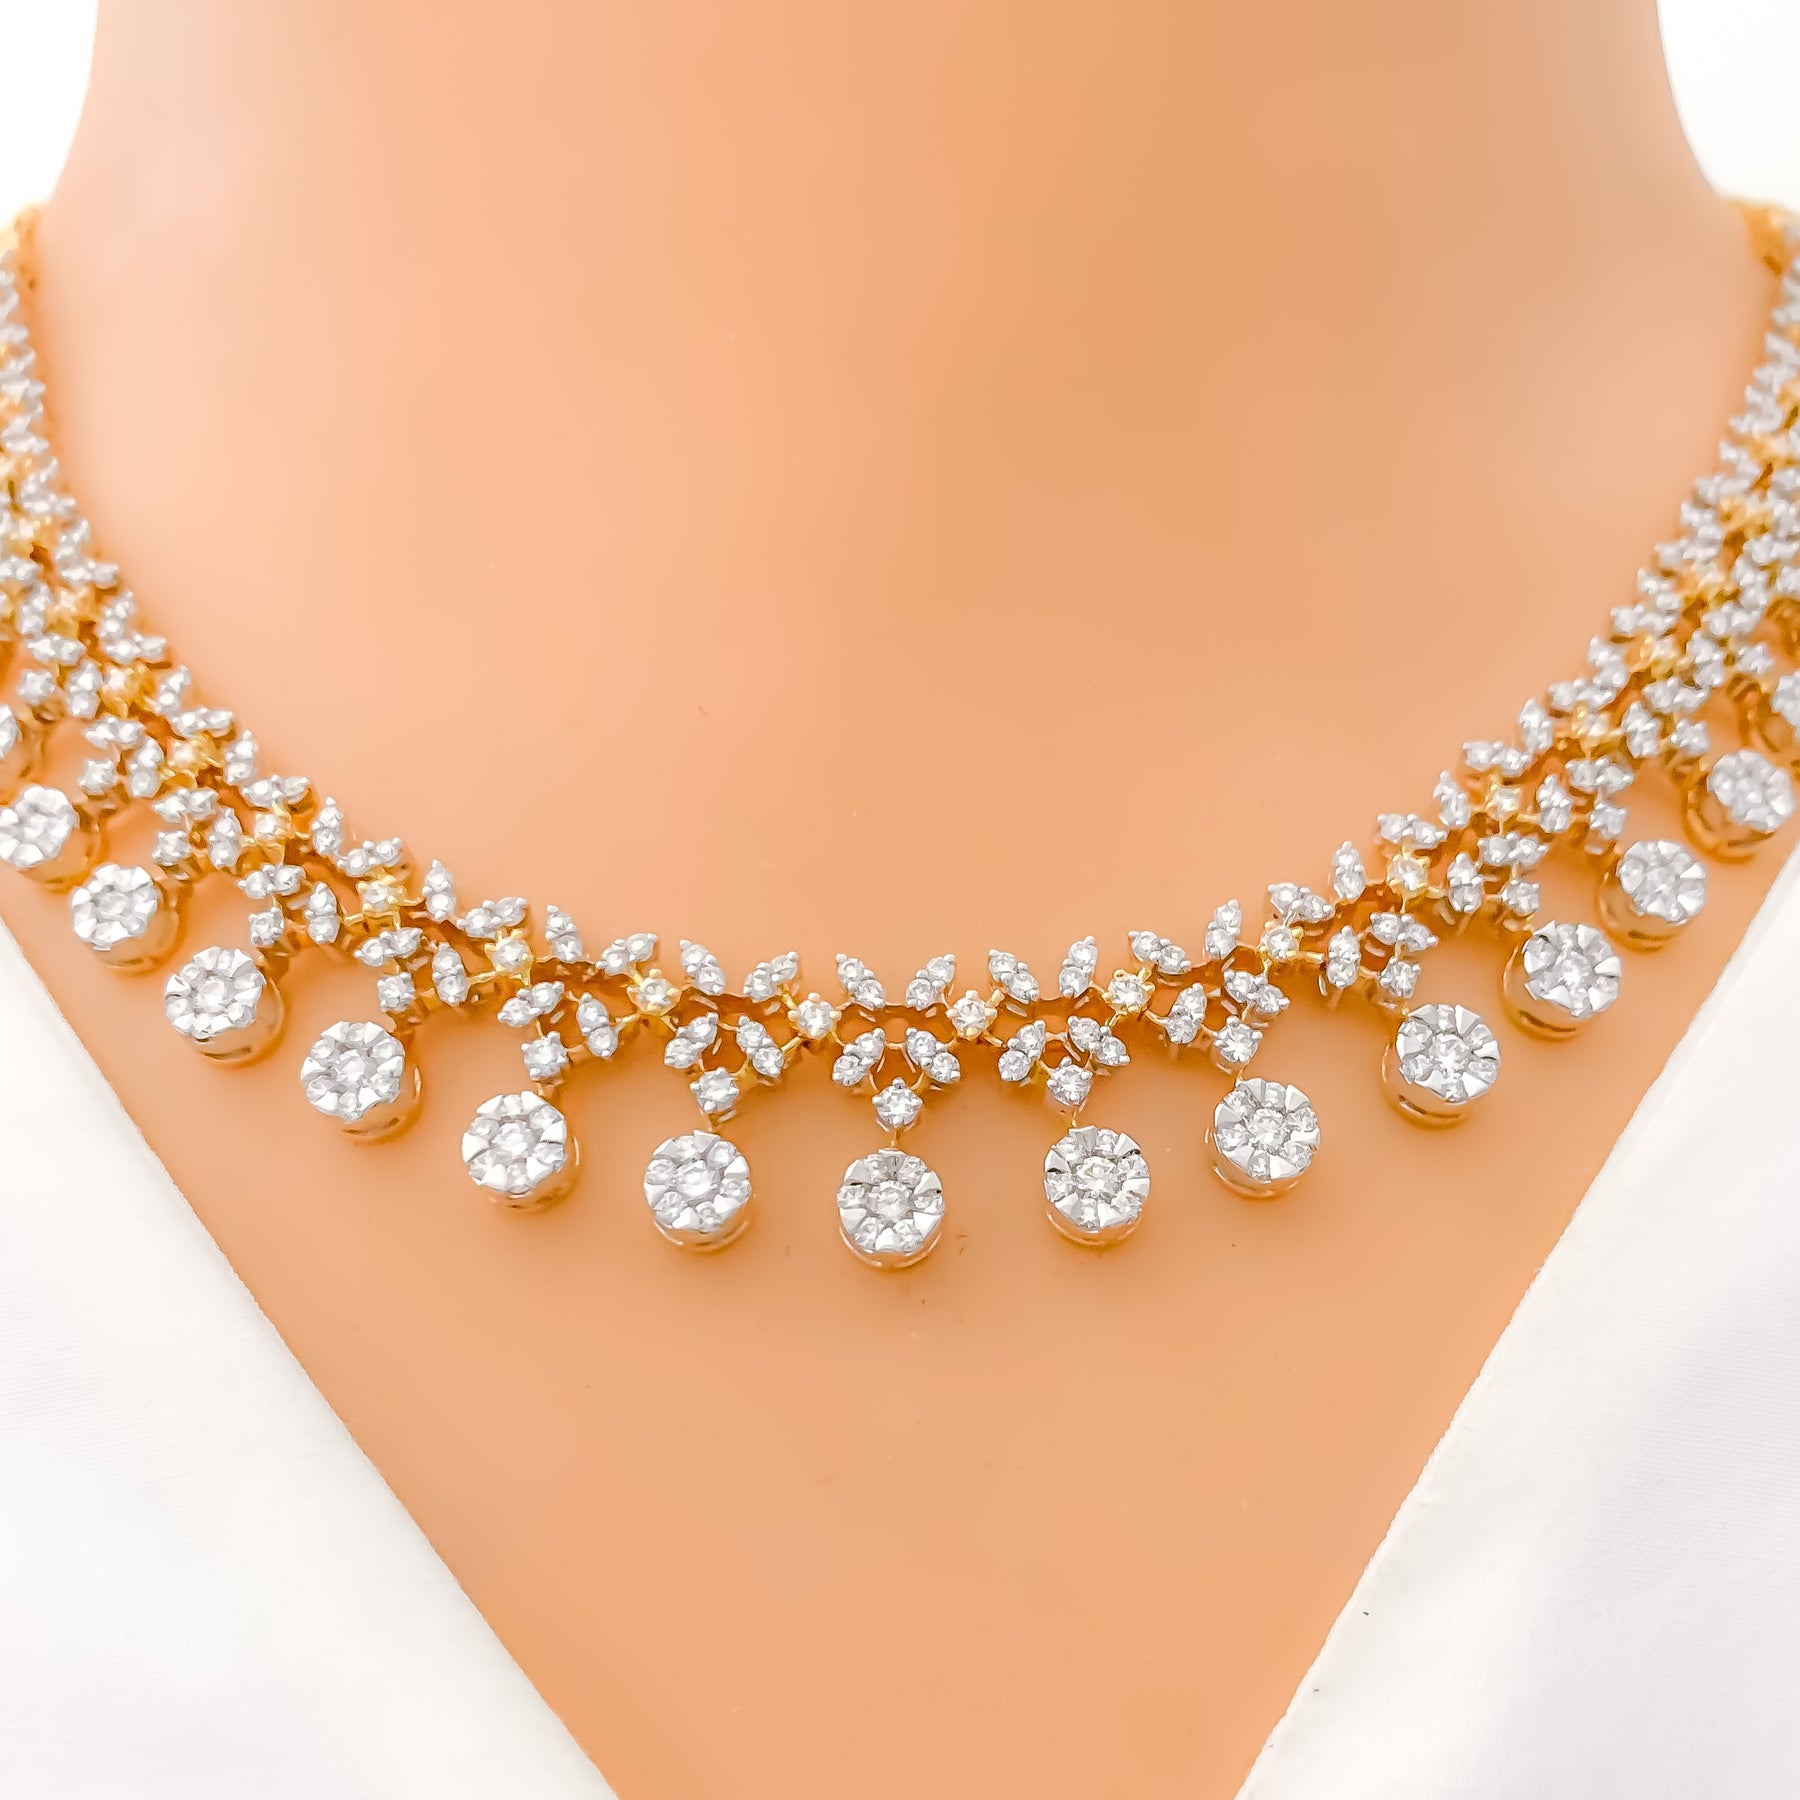 Buy Laxmi Kasulu and Flower Design Gold Necklaces at Krishna Jewellers